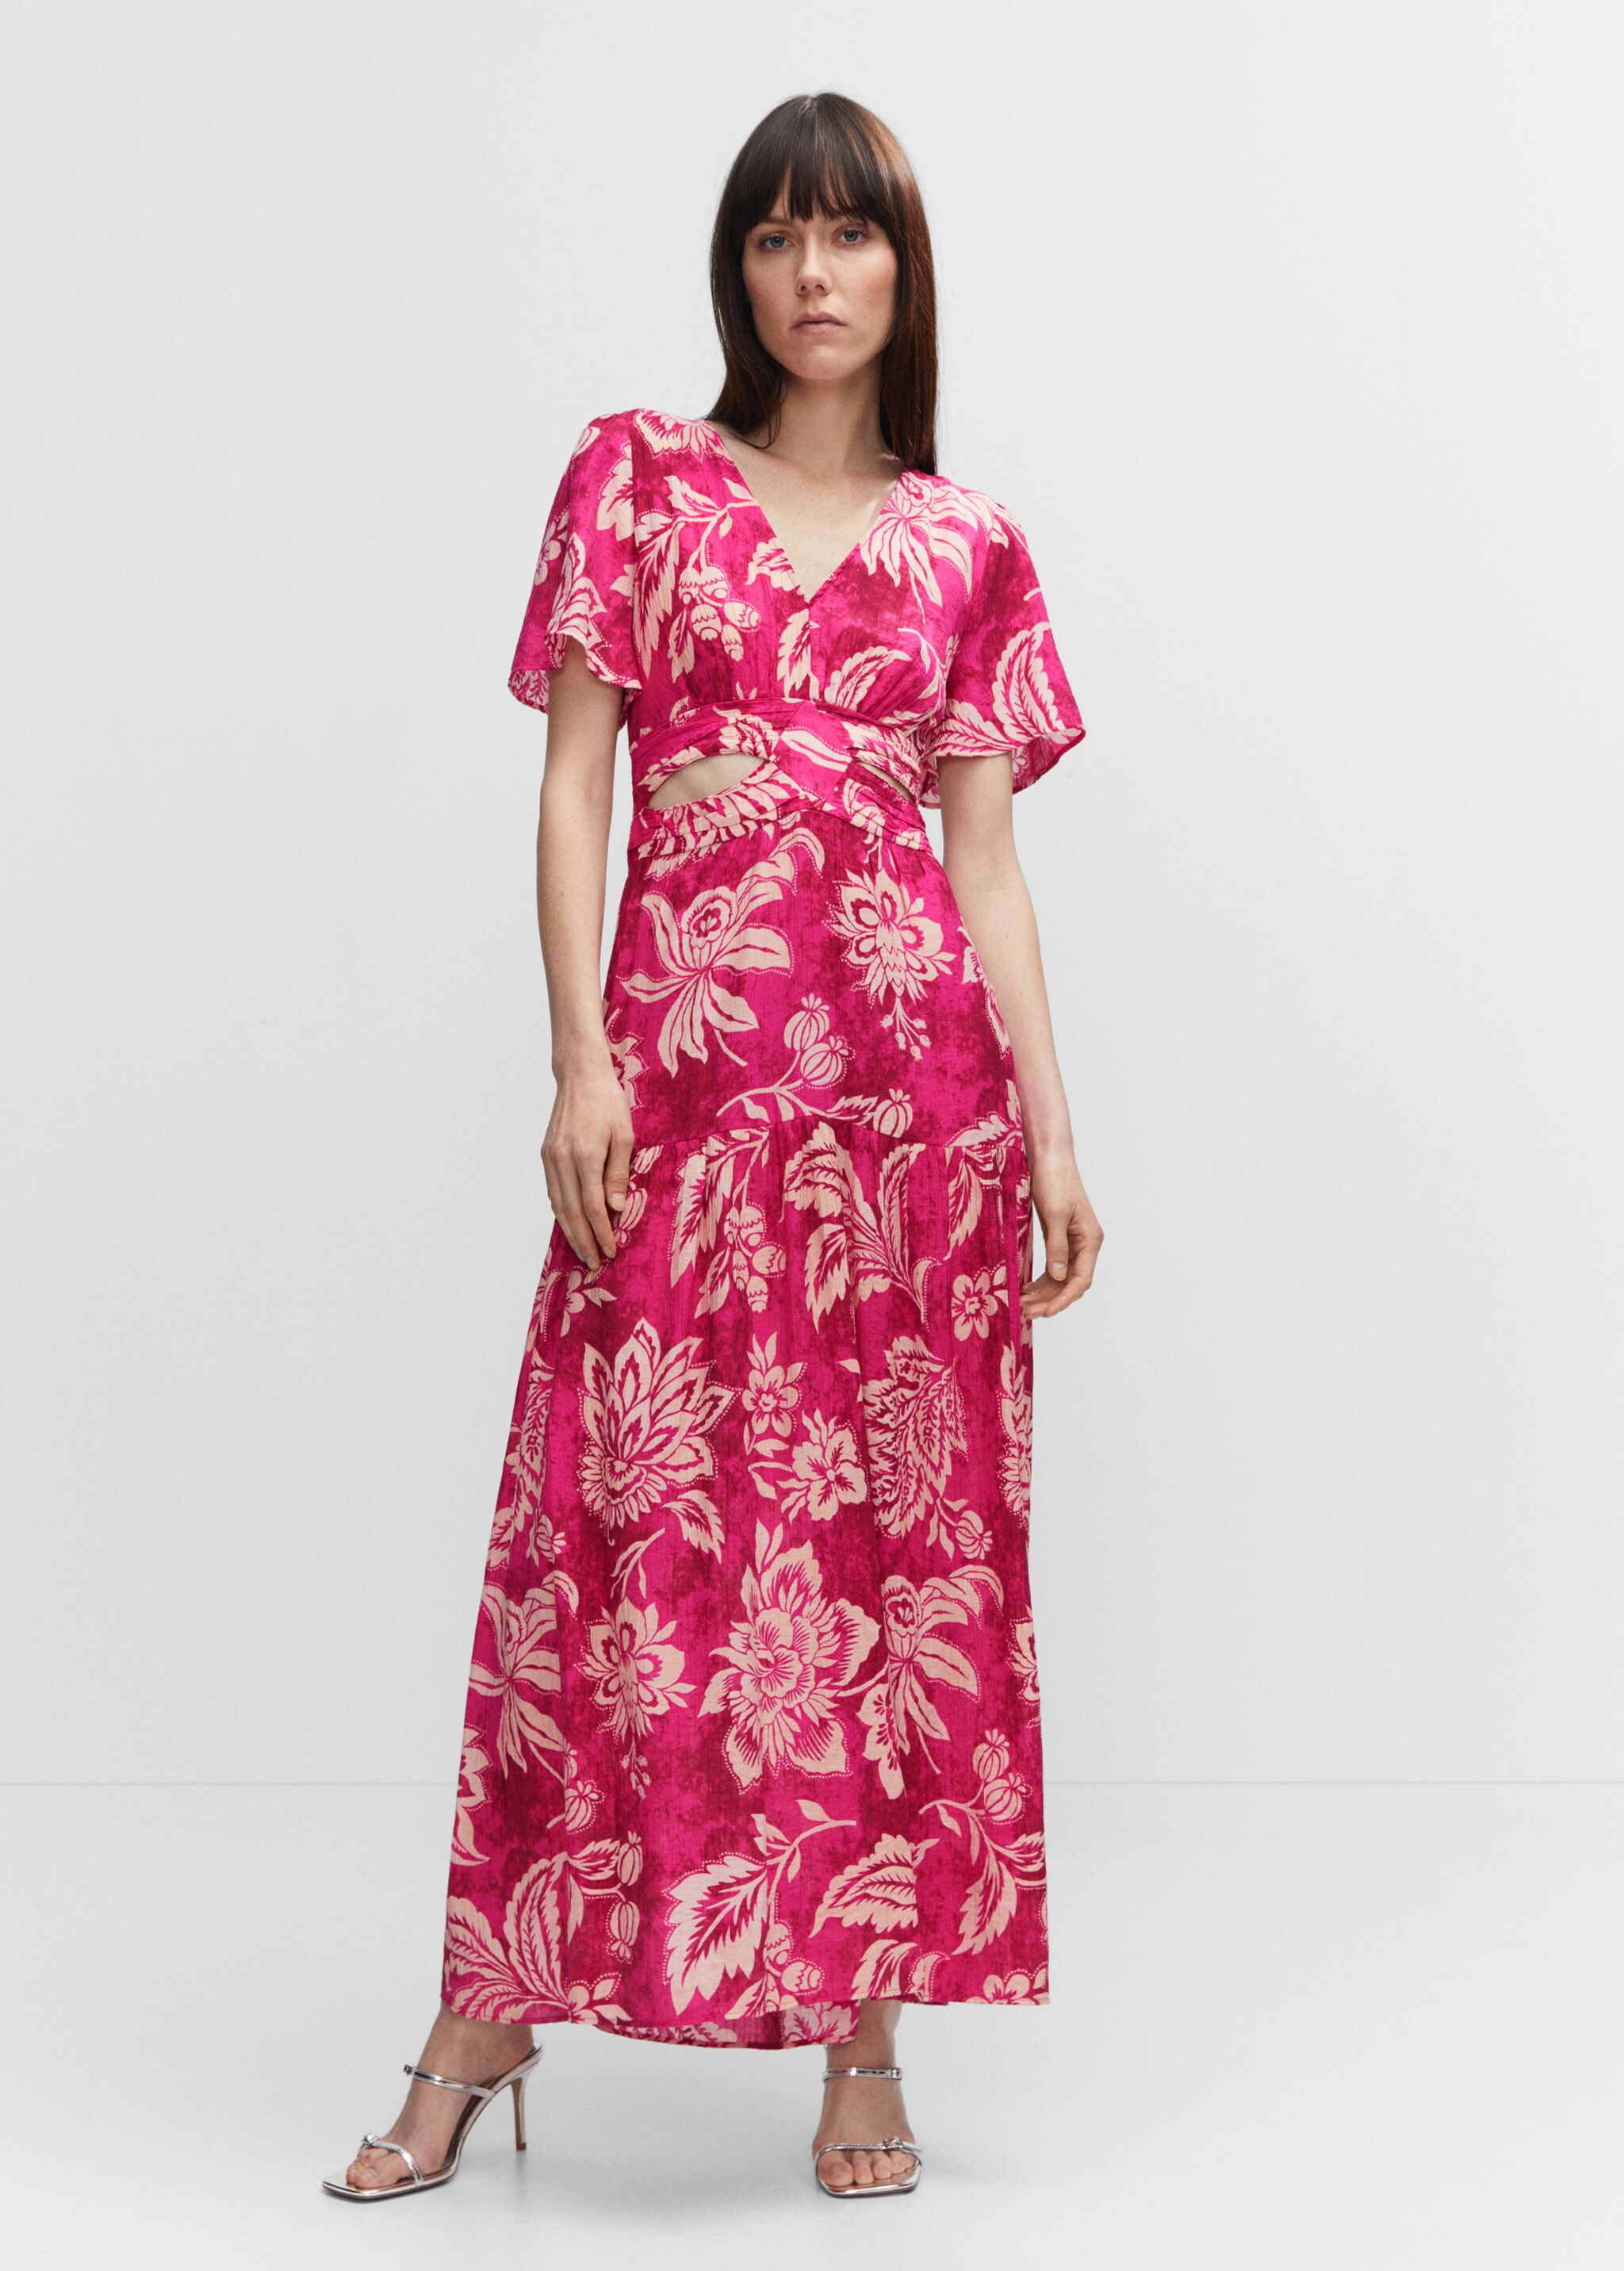 Floral dress with cut-out  - General plane